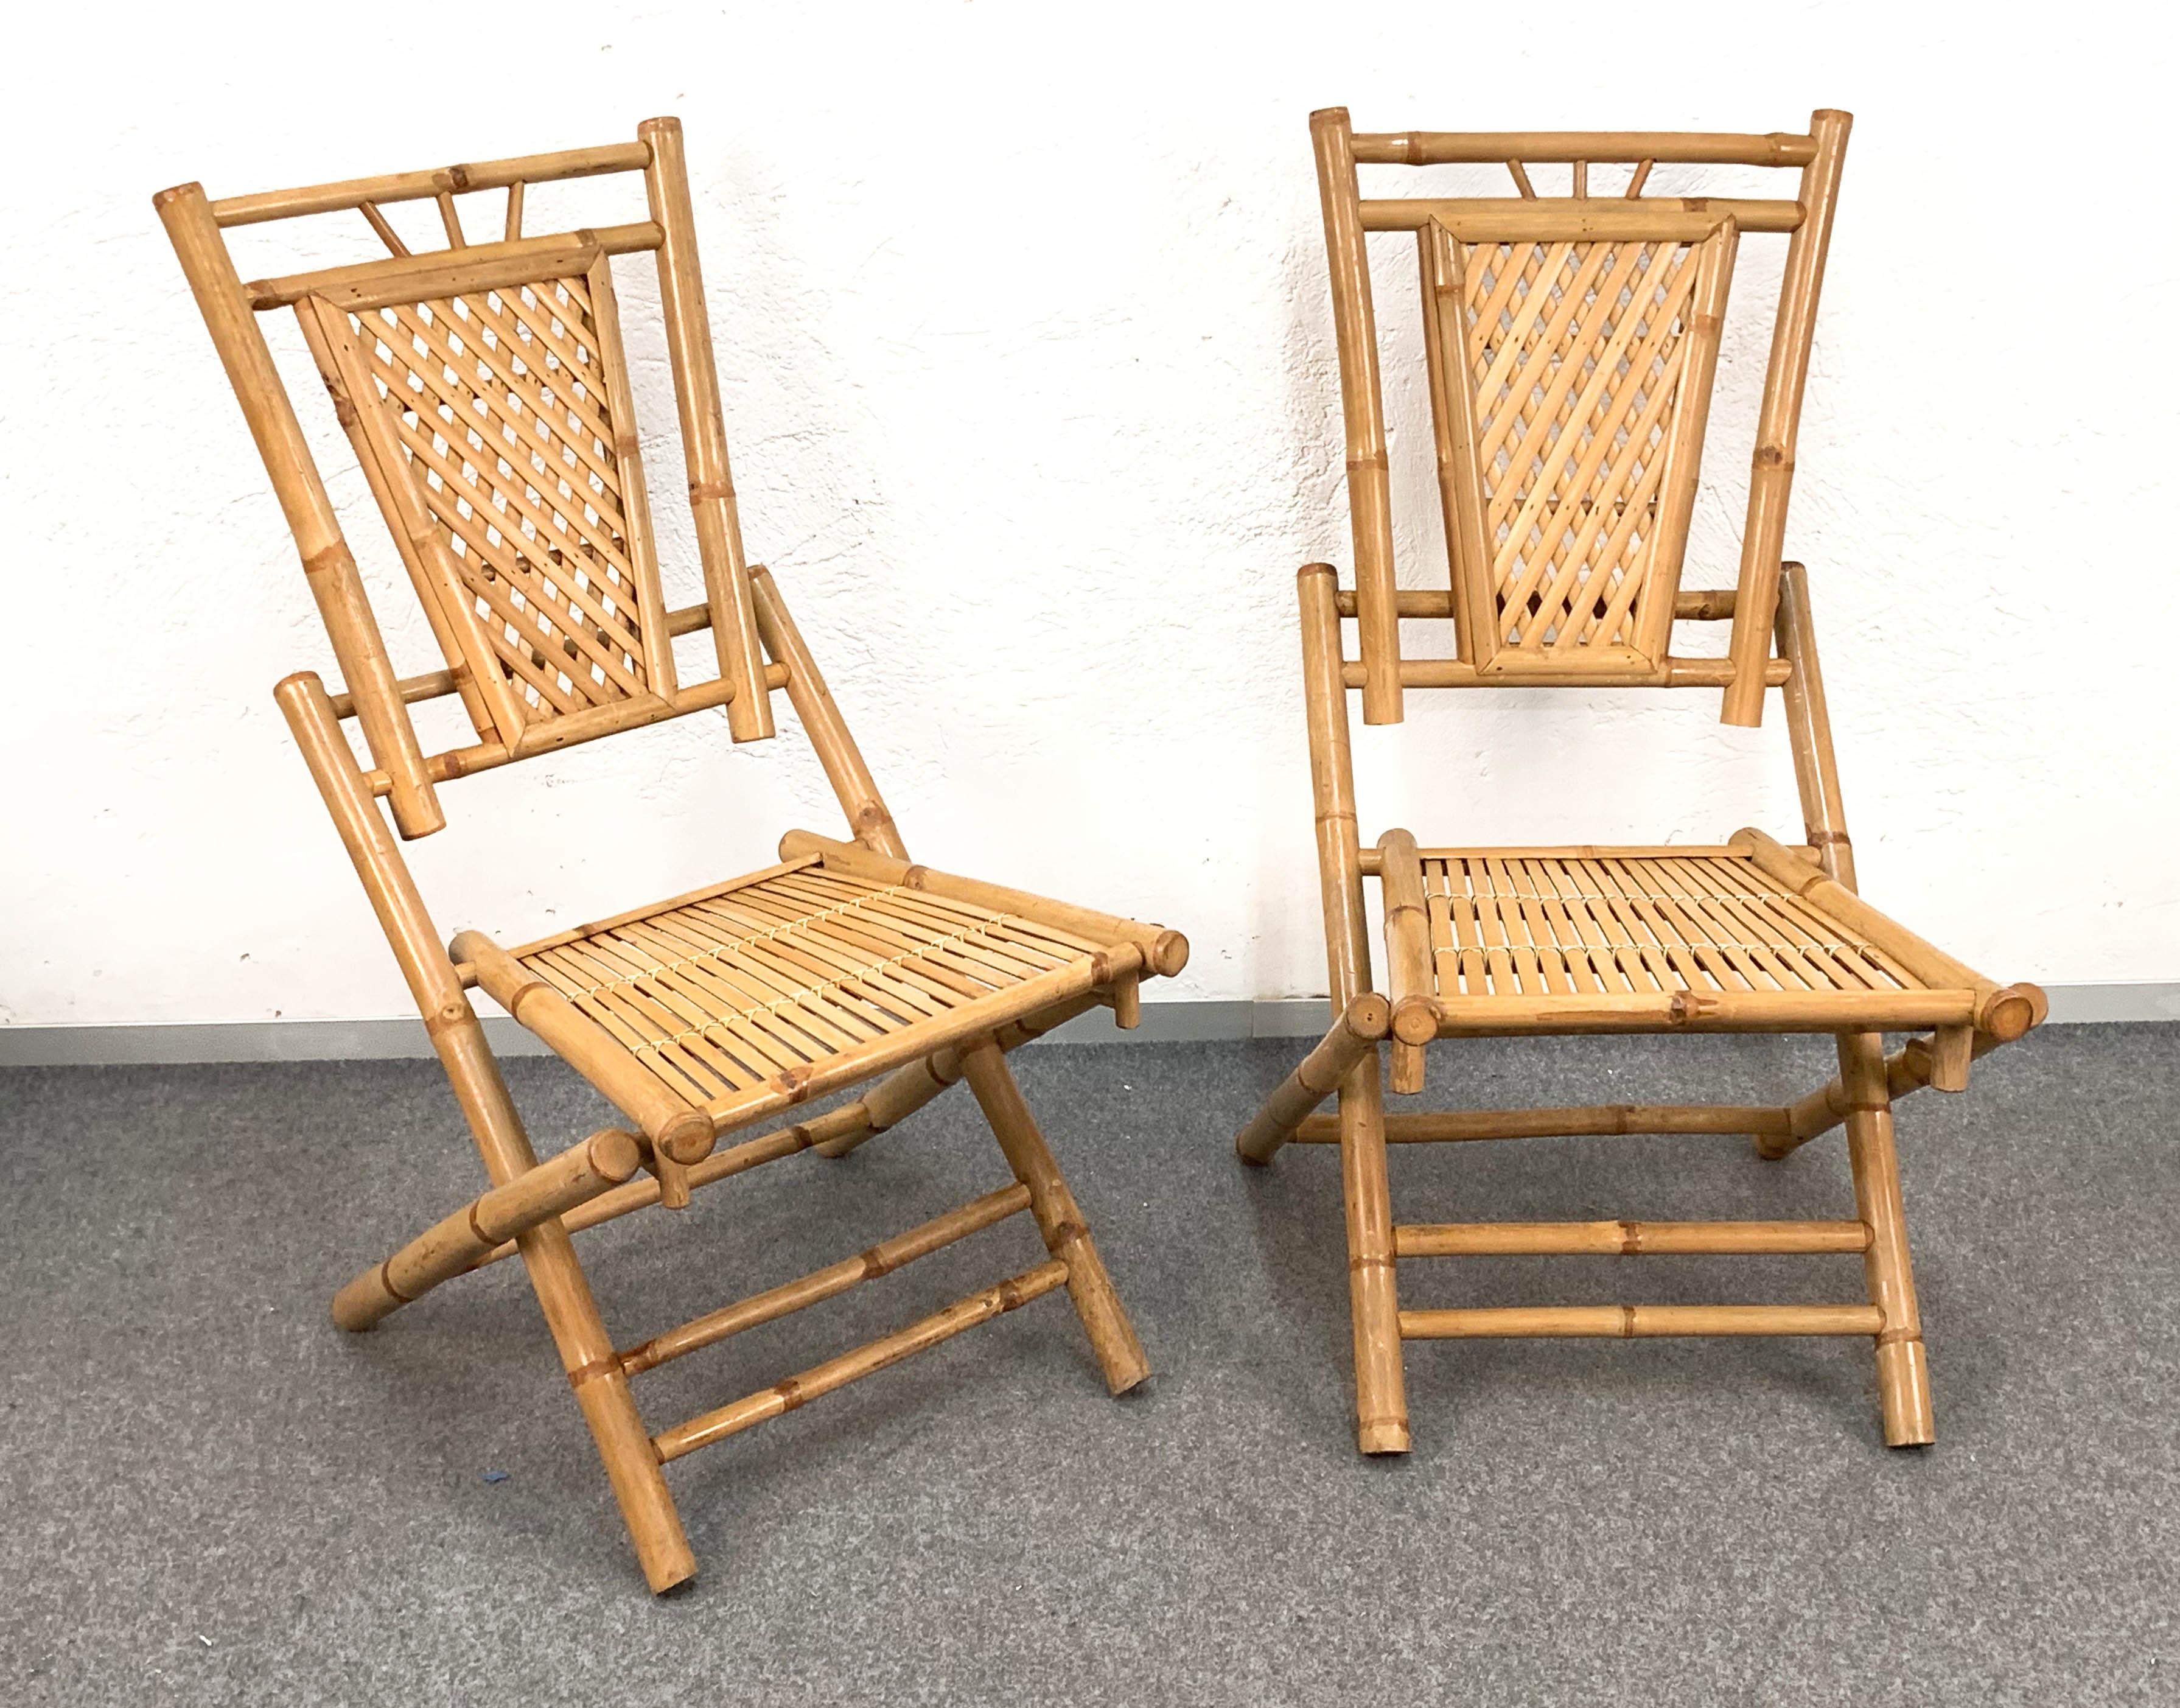 Midcentury Bamboo and Rattan Italian Foldable Table and Four Chairs, 1960s For Sale 9